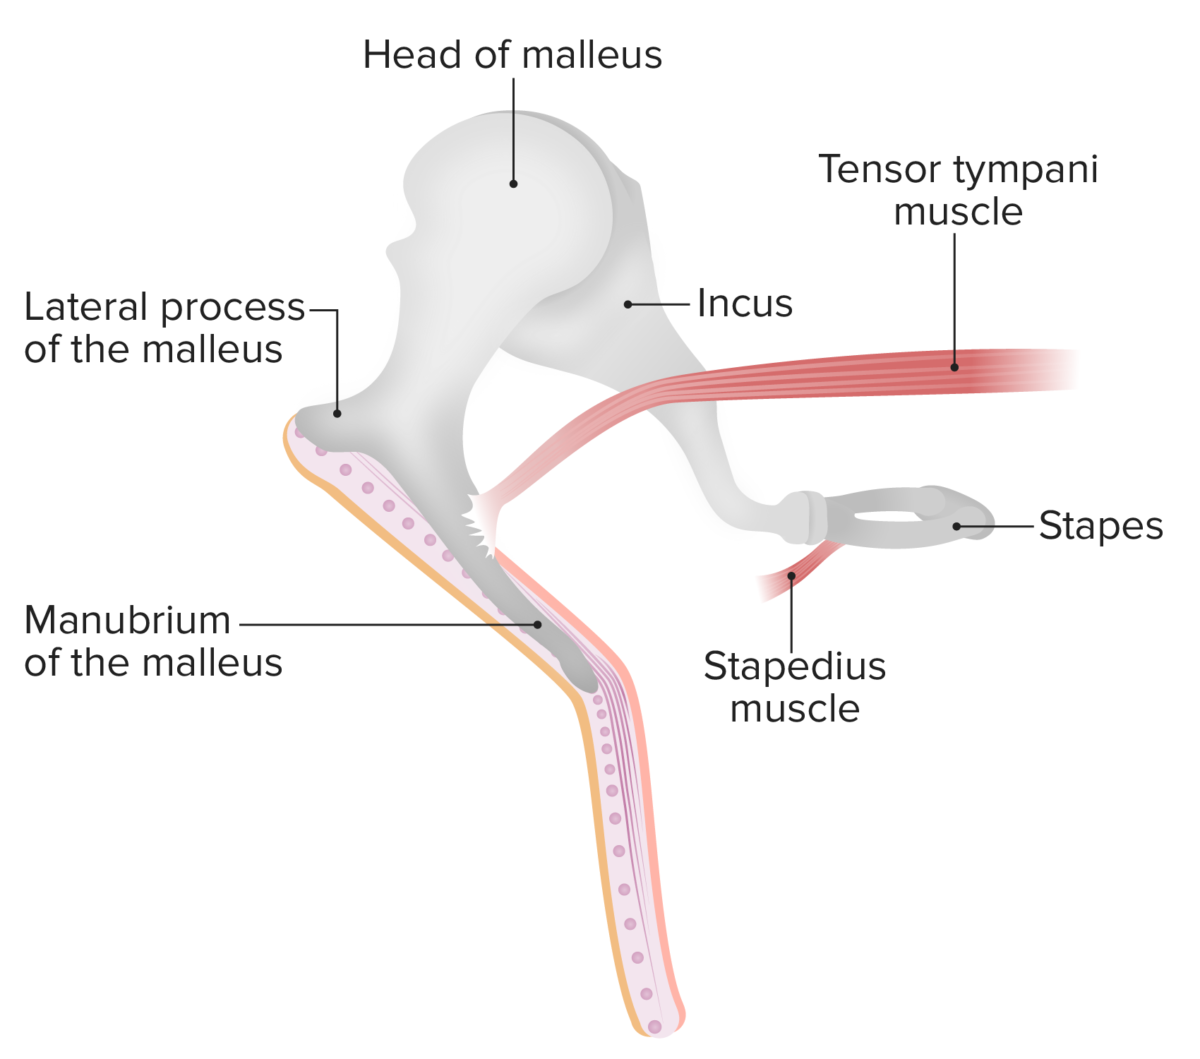 Muscles and ossicles of the middle ear